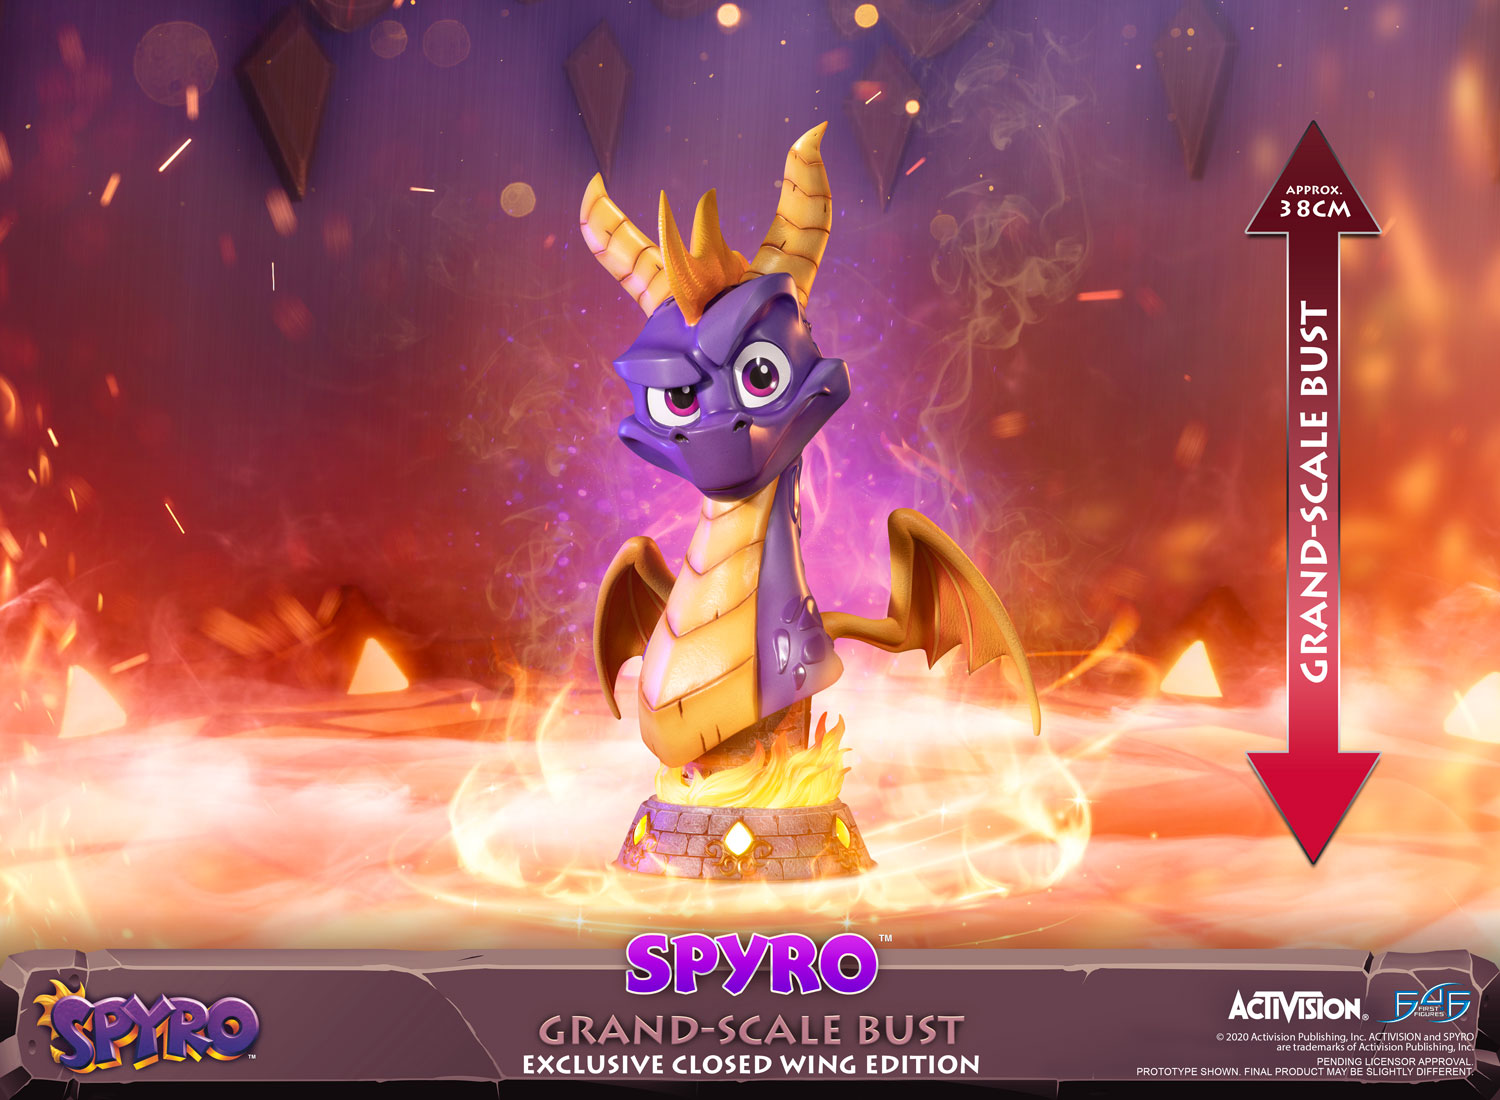 Spyro™ Grand-Scale Bust (Exclusive Closed Wing Edition)